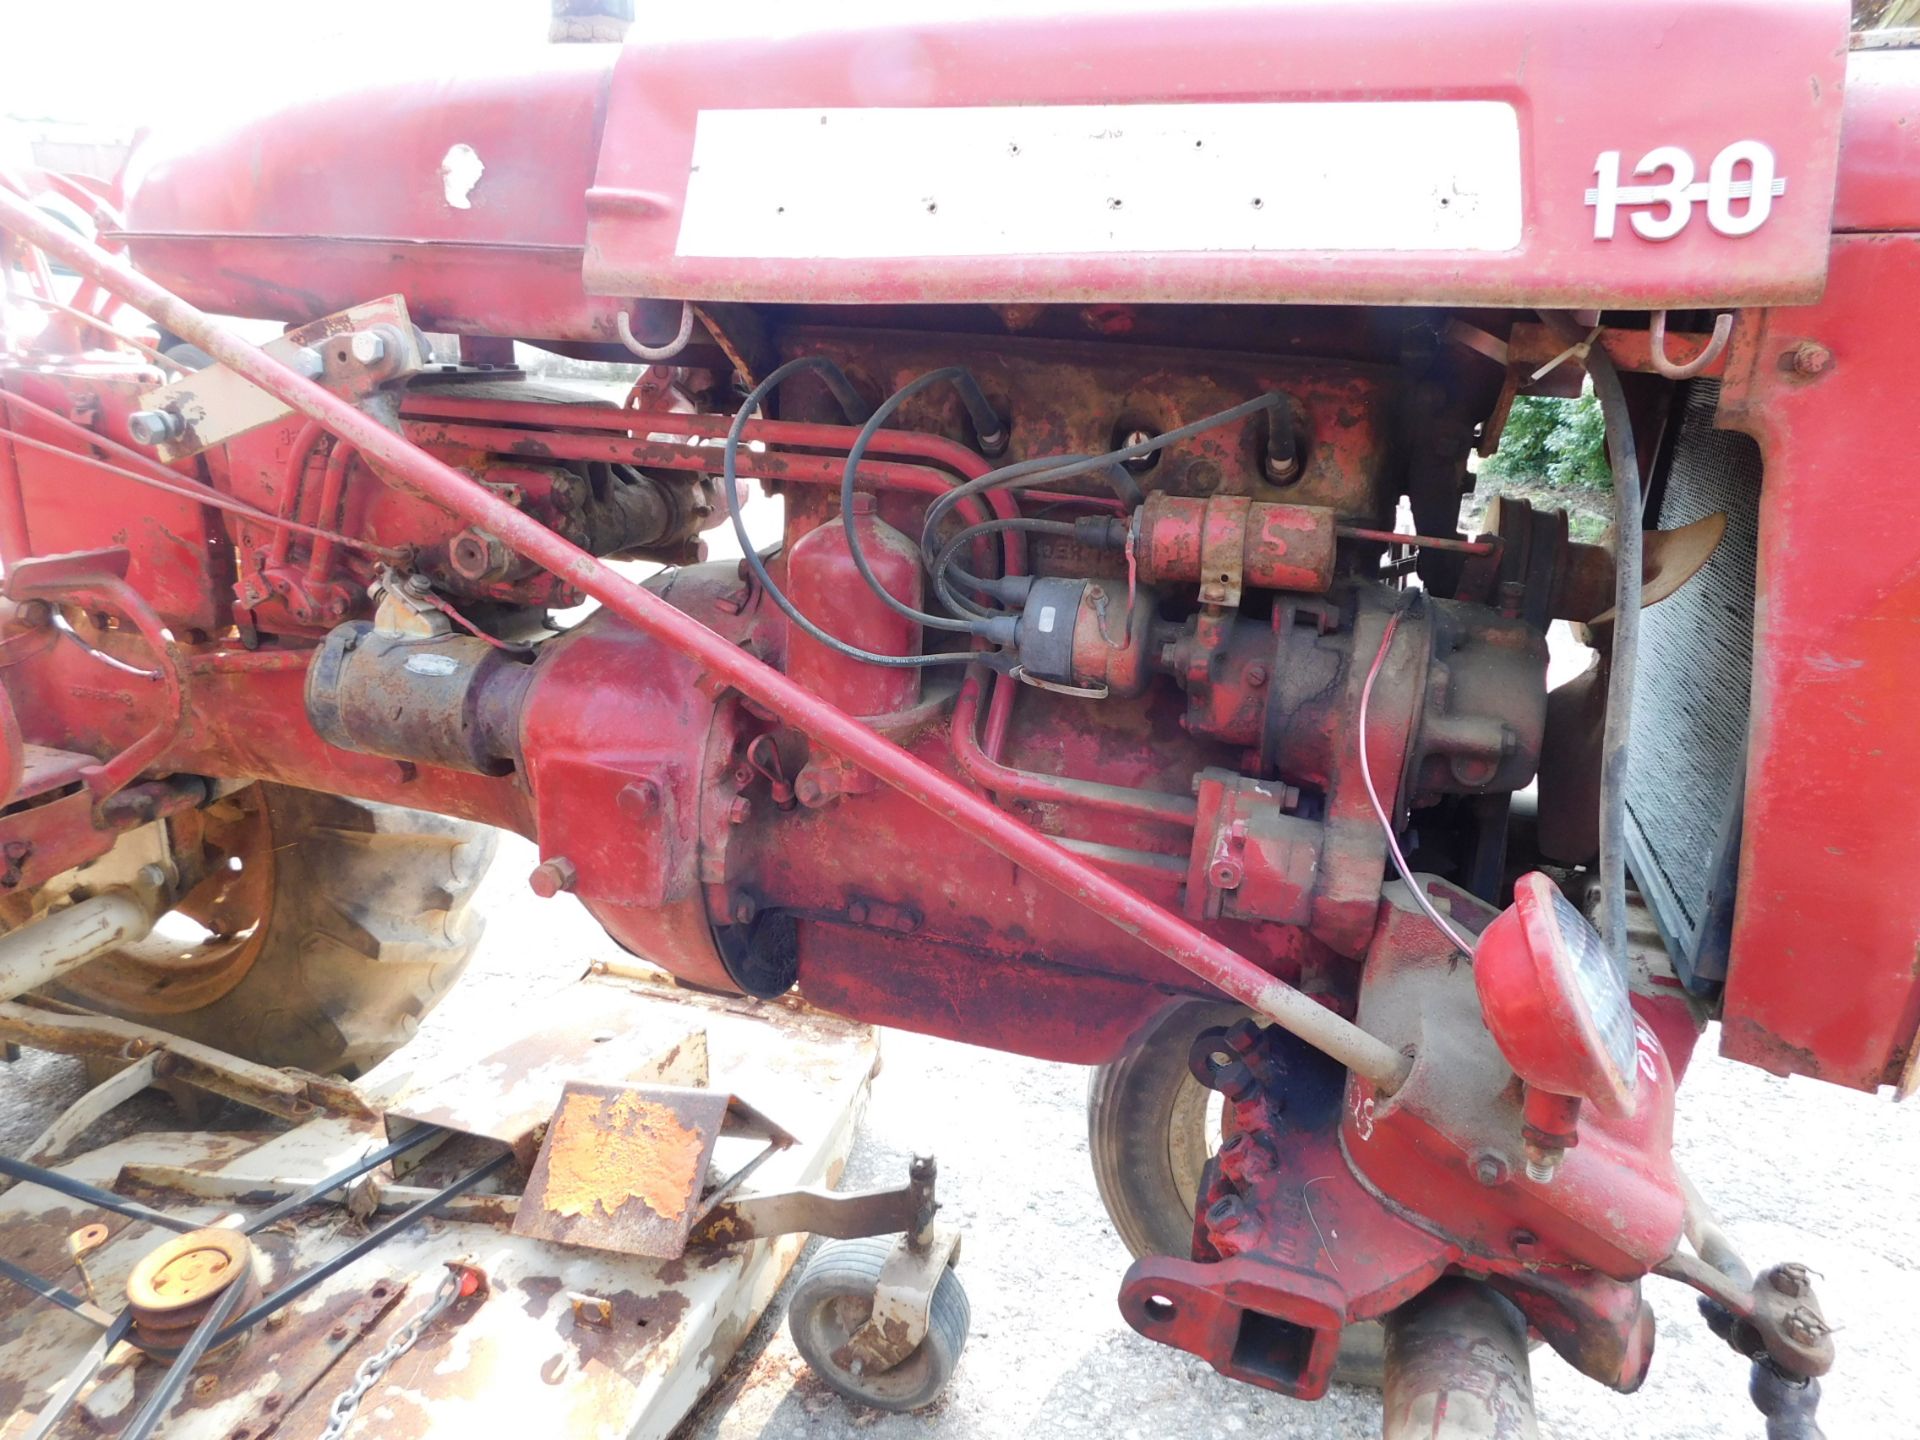 1957 Farmall Model 130 Tractor with Woods 72" Belly Mower - Image 12 of 22